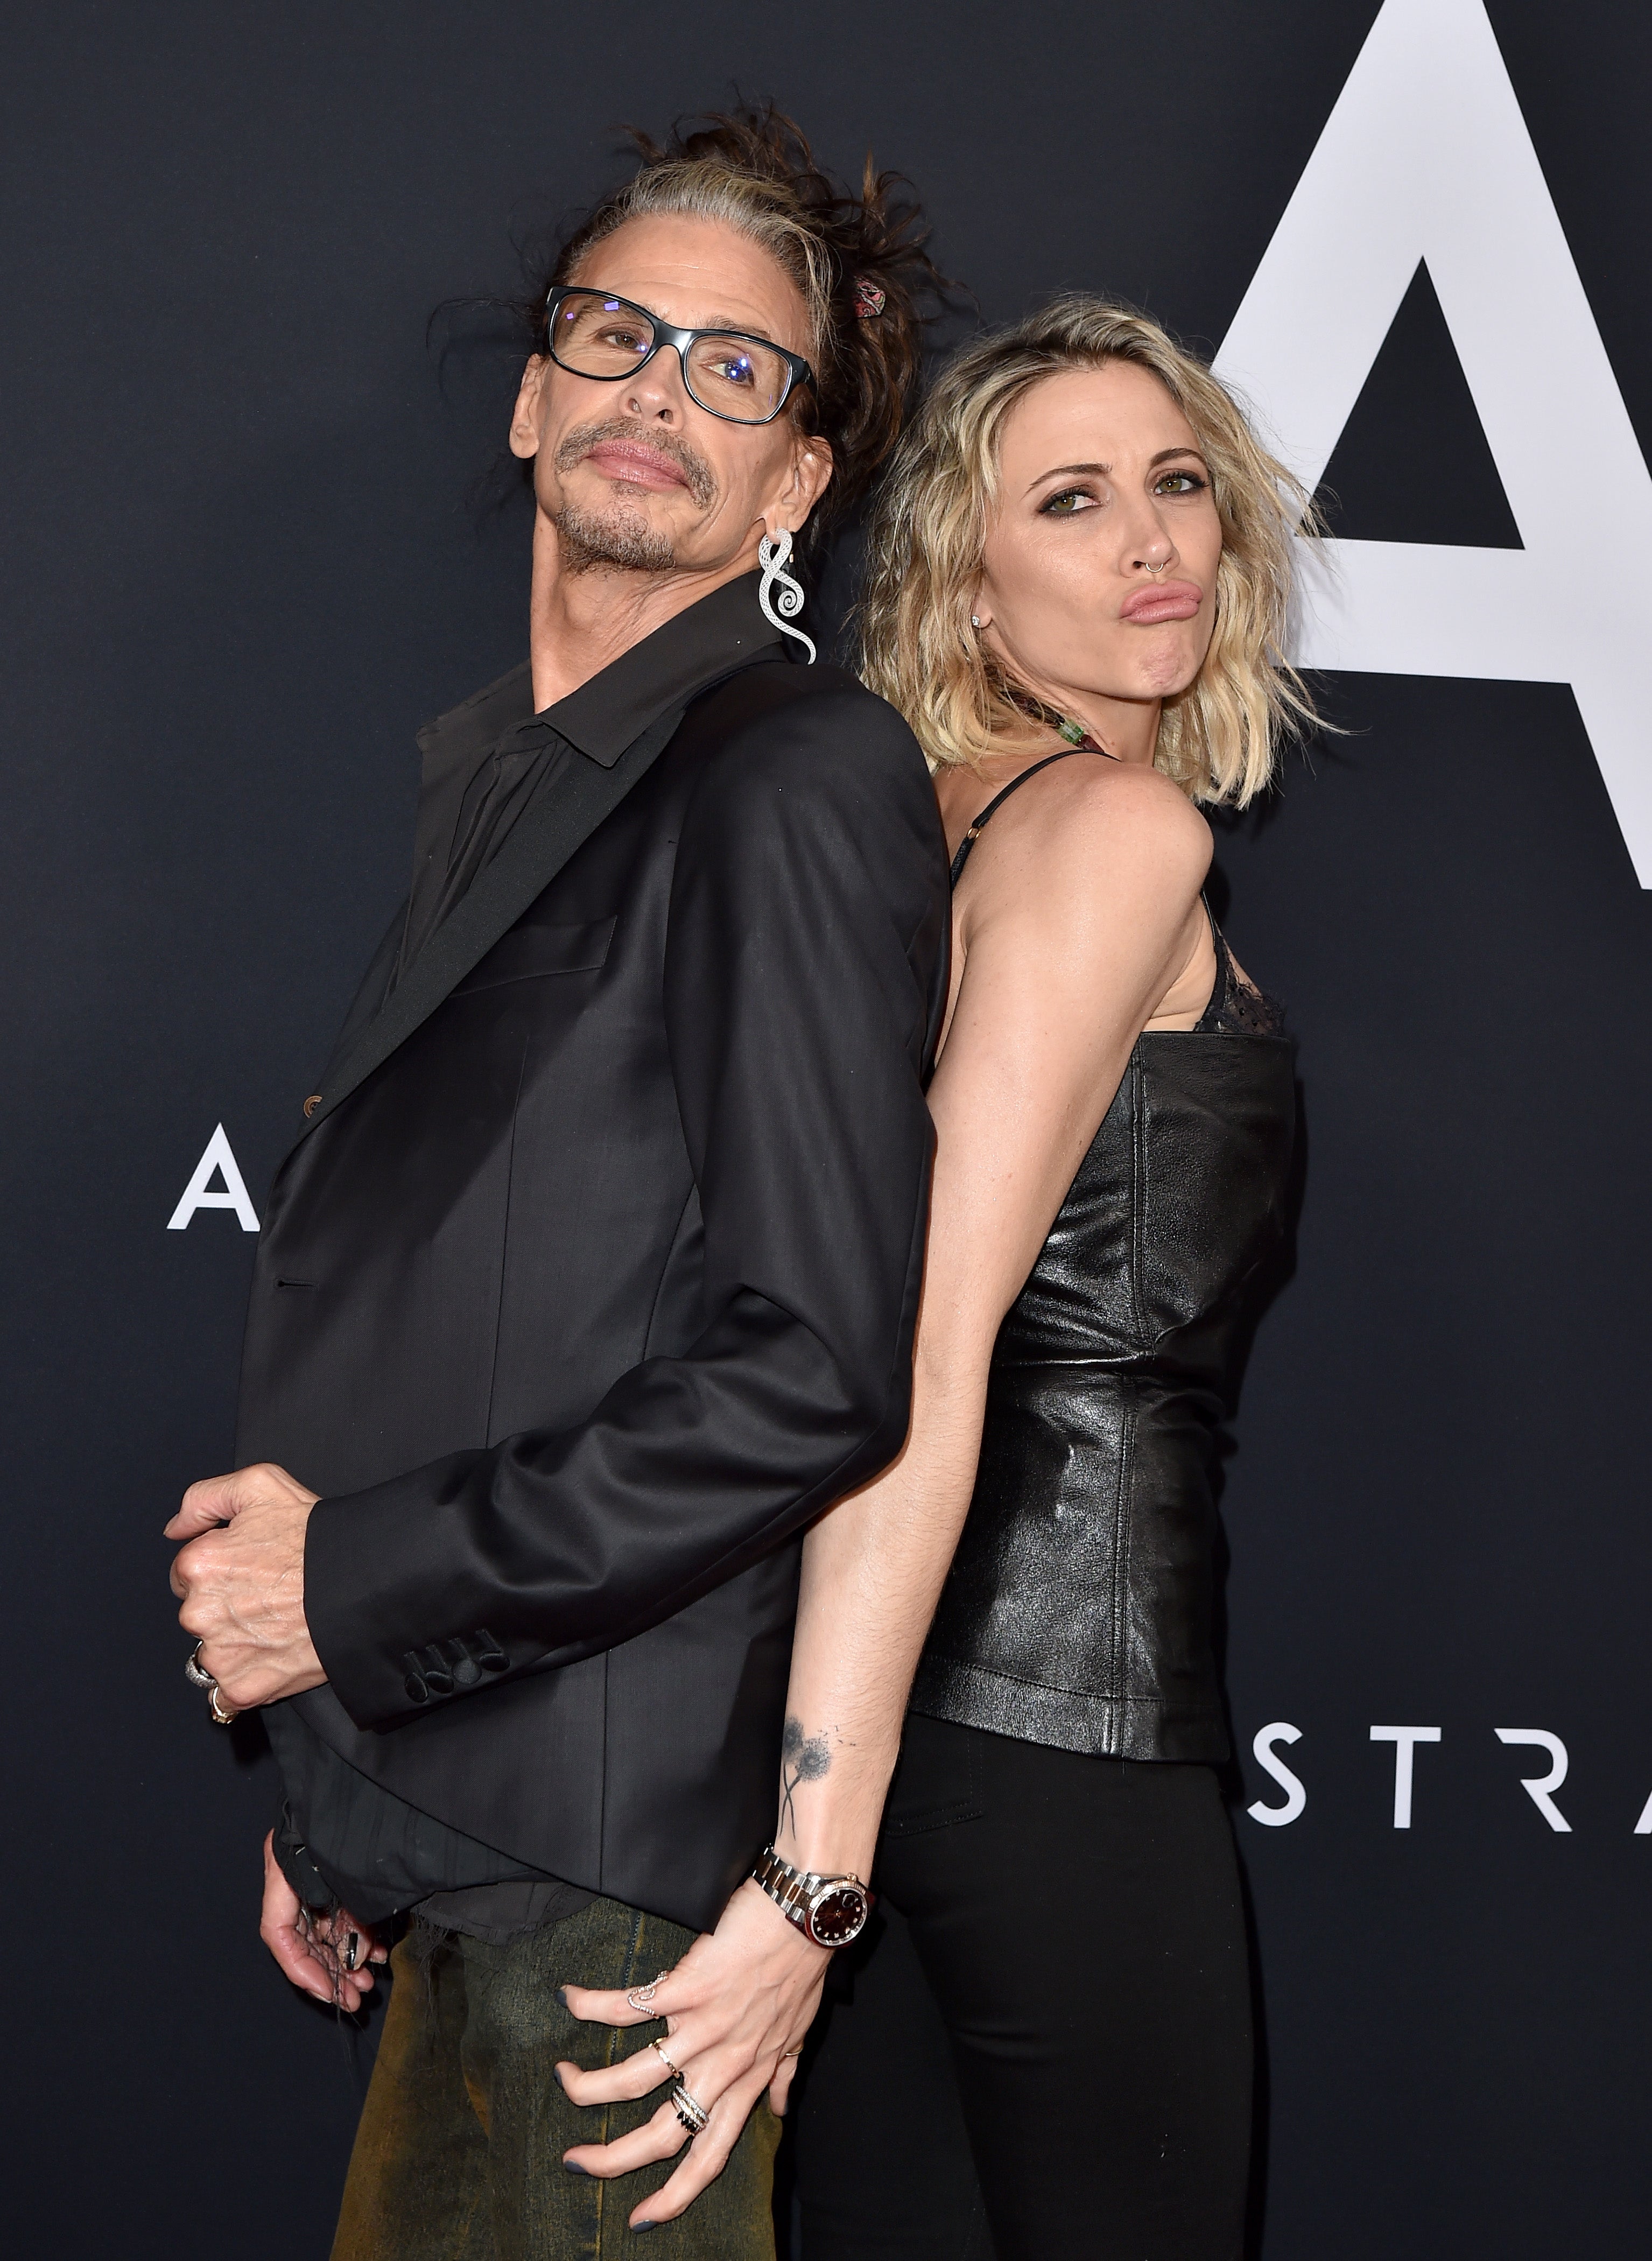 Steven Tyler's Latest Girlfriend Is Younger Than Most of His Daughters